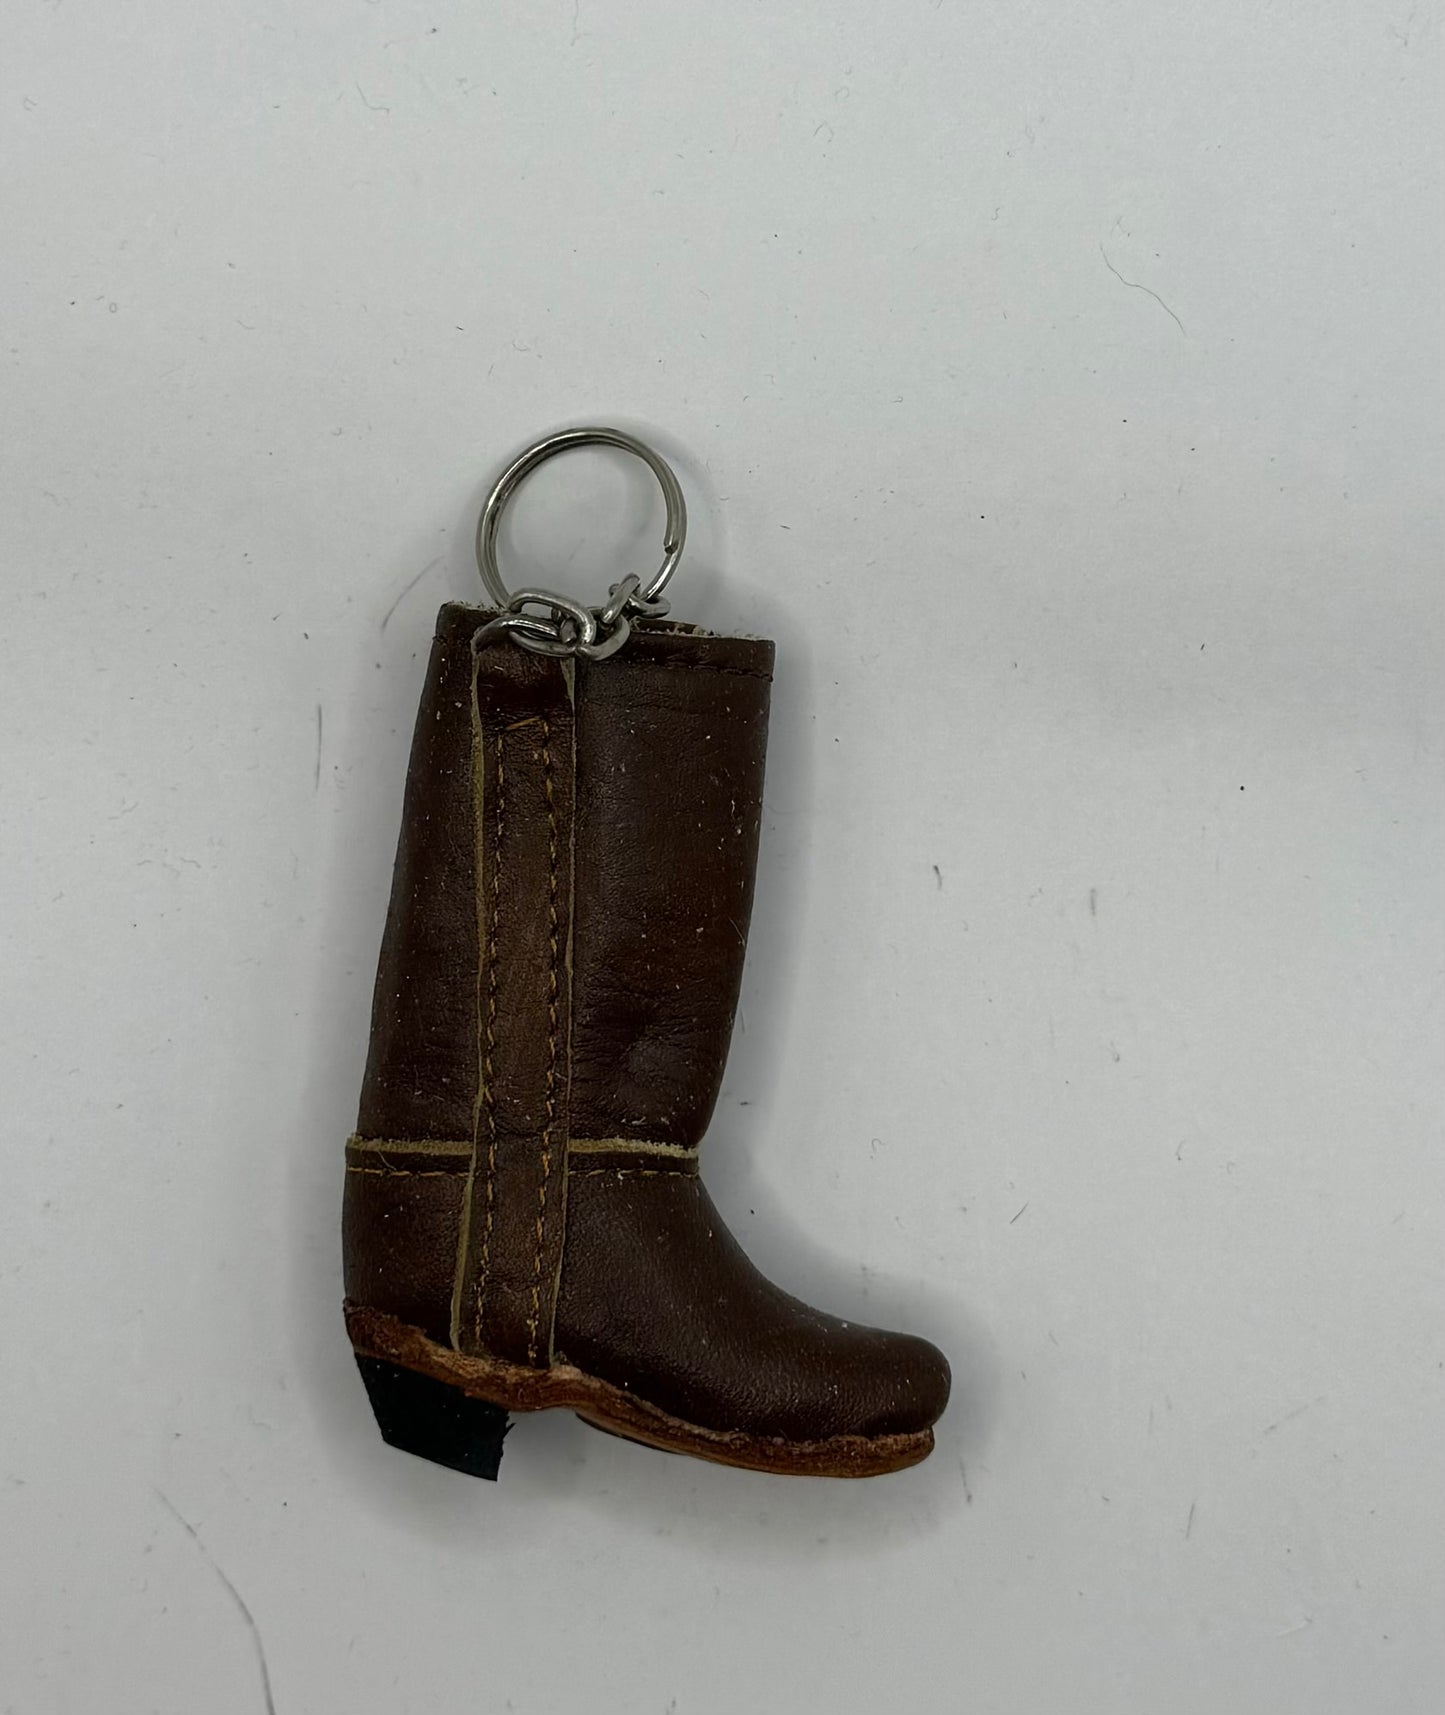 Leather Riding Boot Keychain